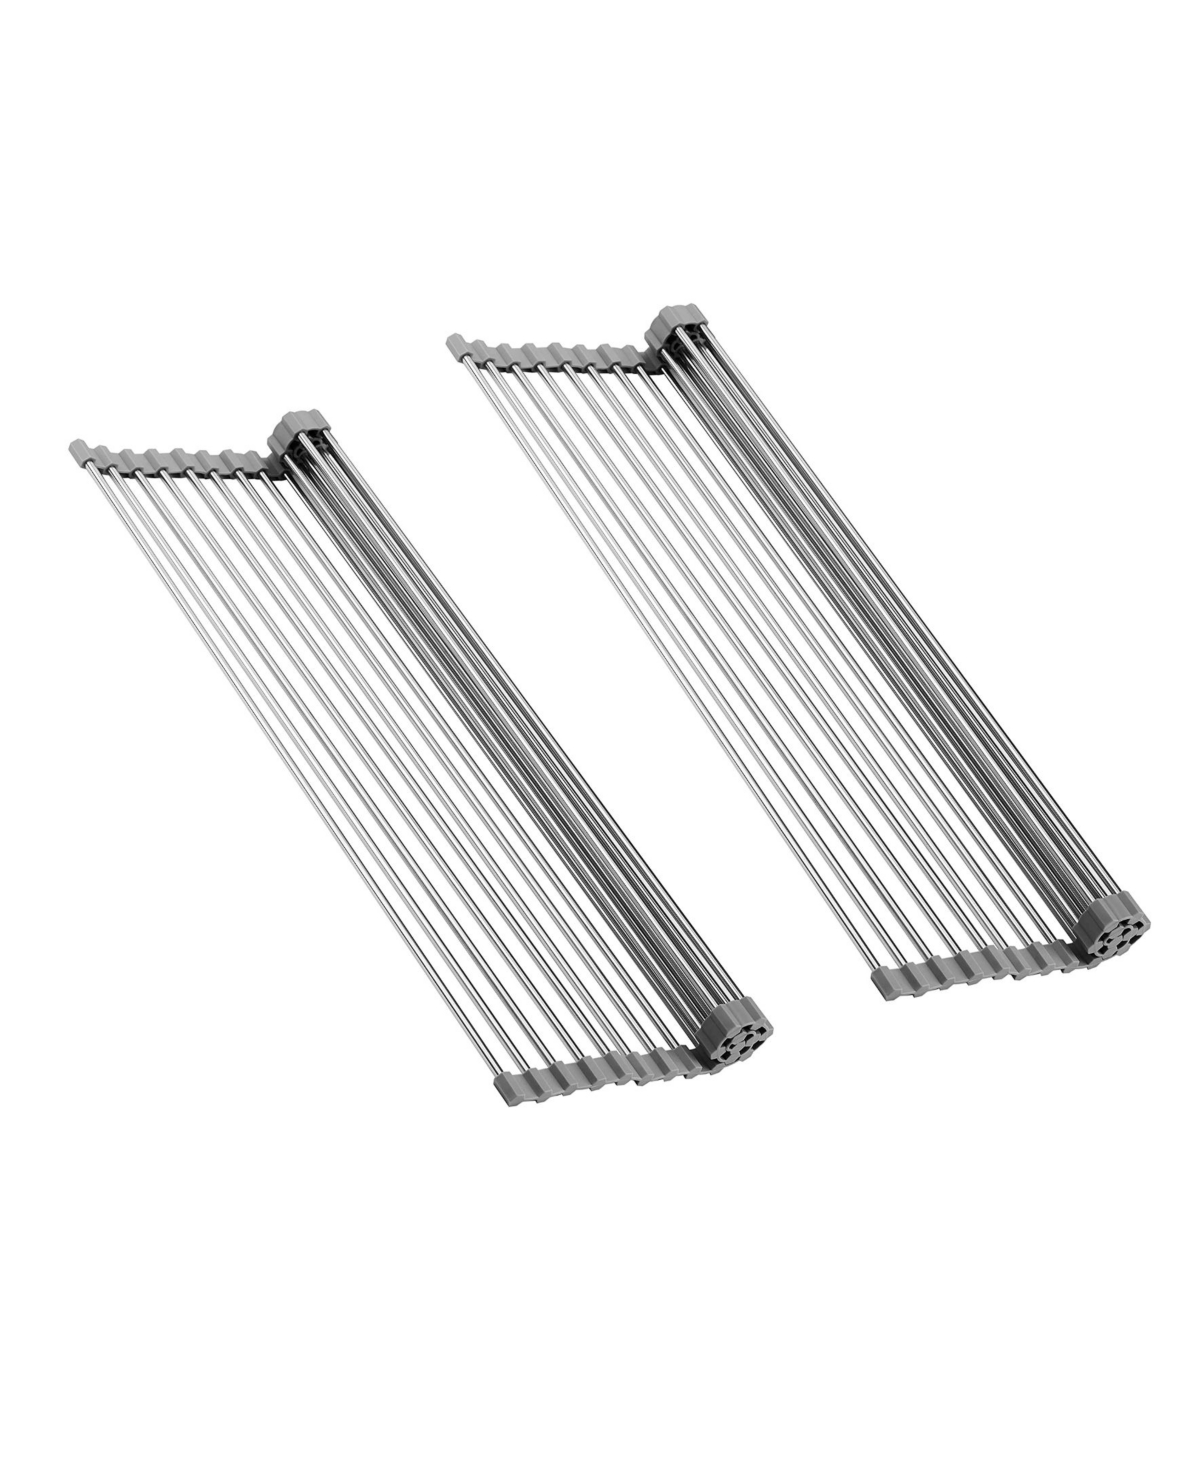 Cheer Collection Roll Up Dish Drying Rack, 2 Pack In Gray